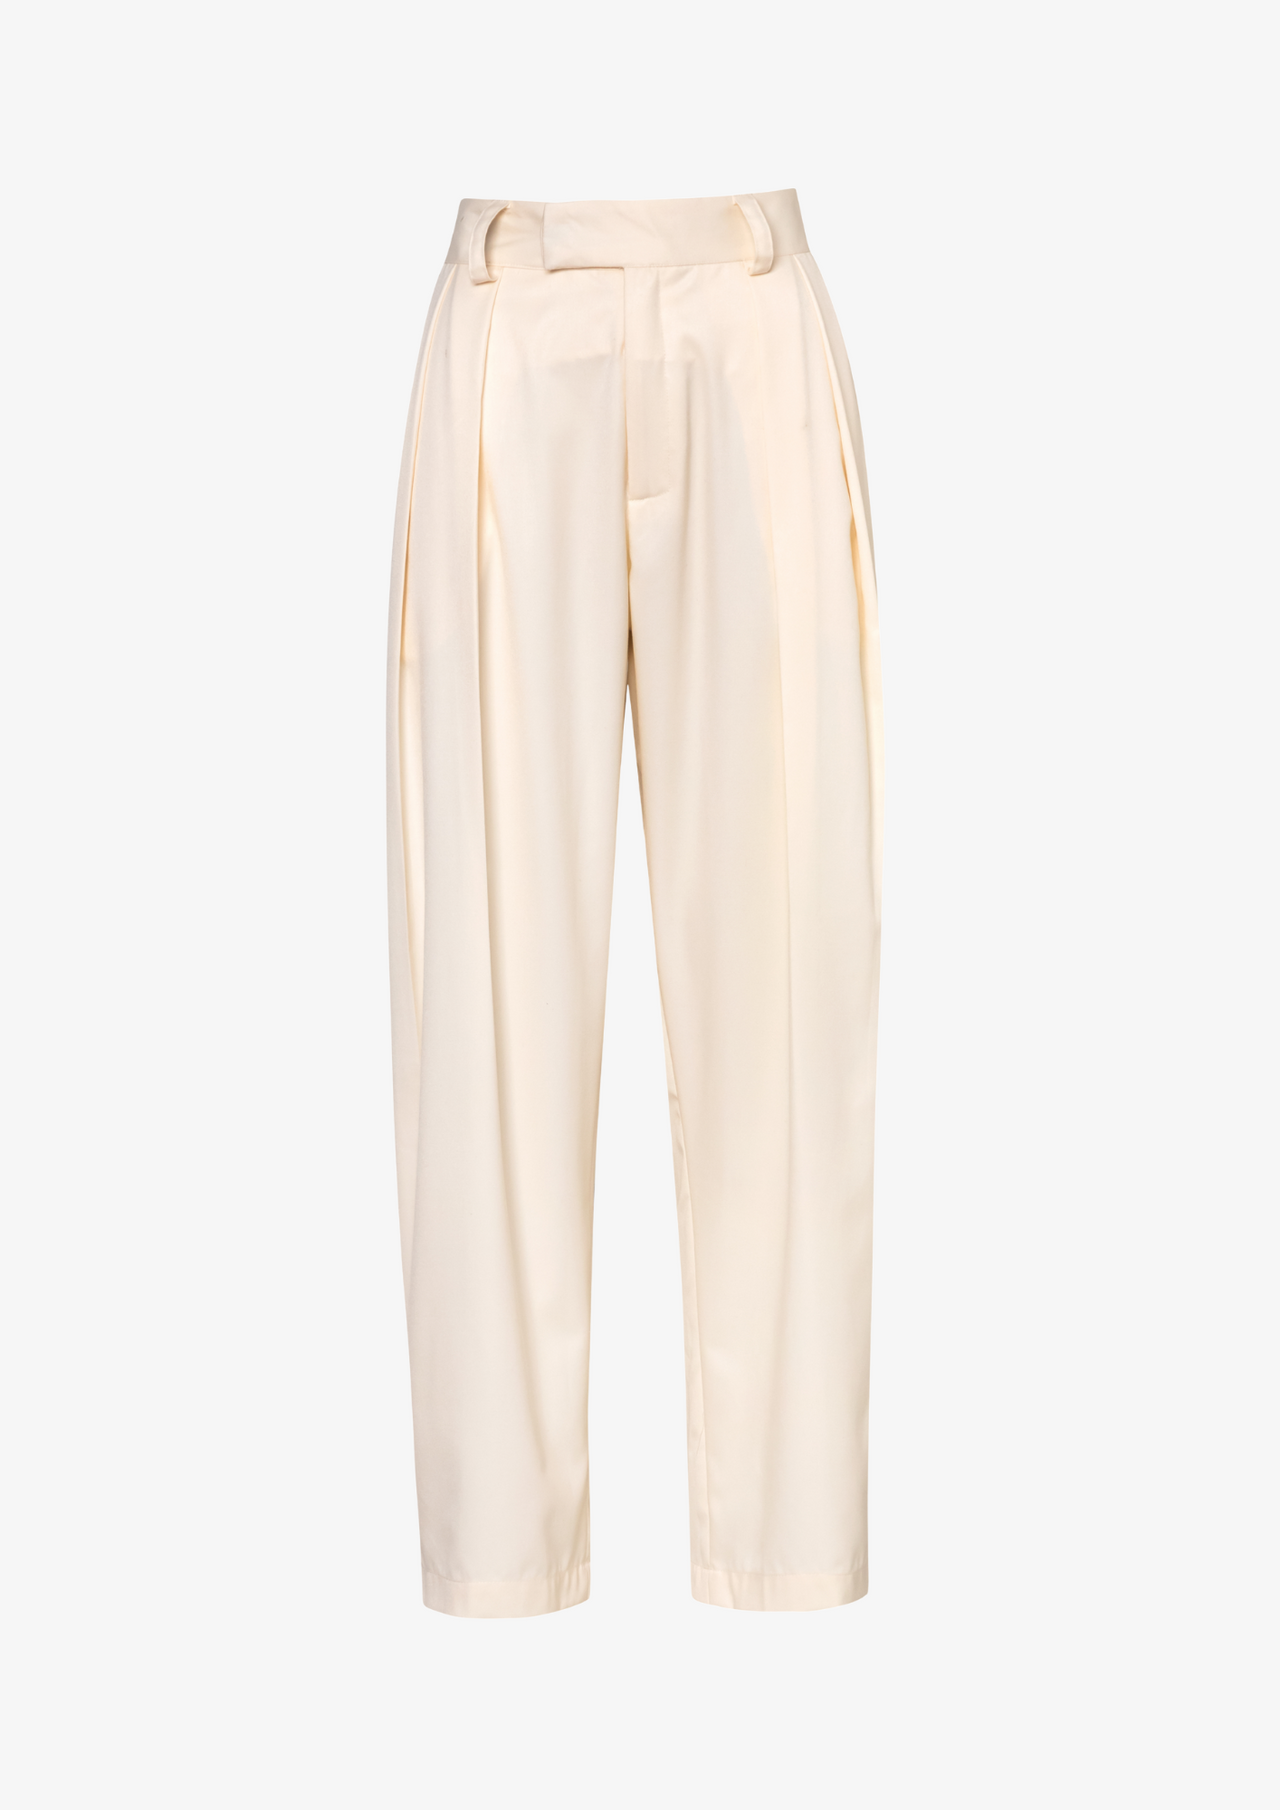 Pleated Trousers in off-white